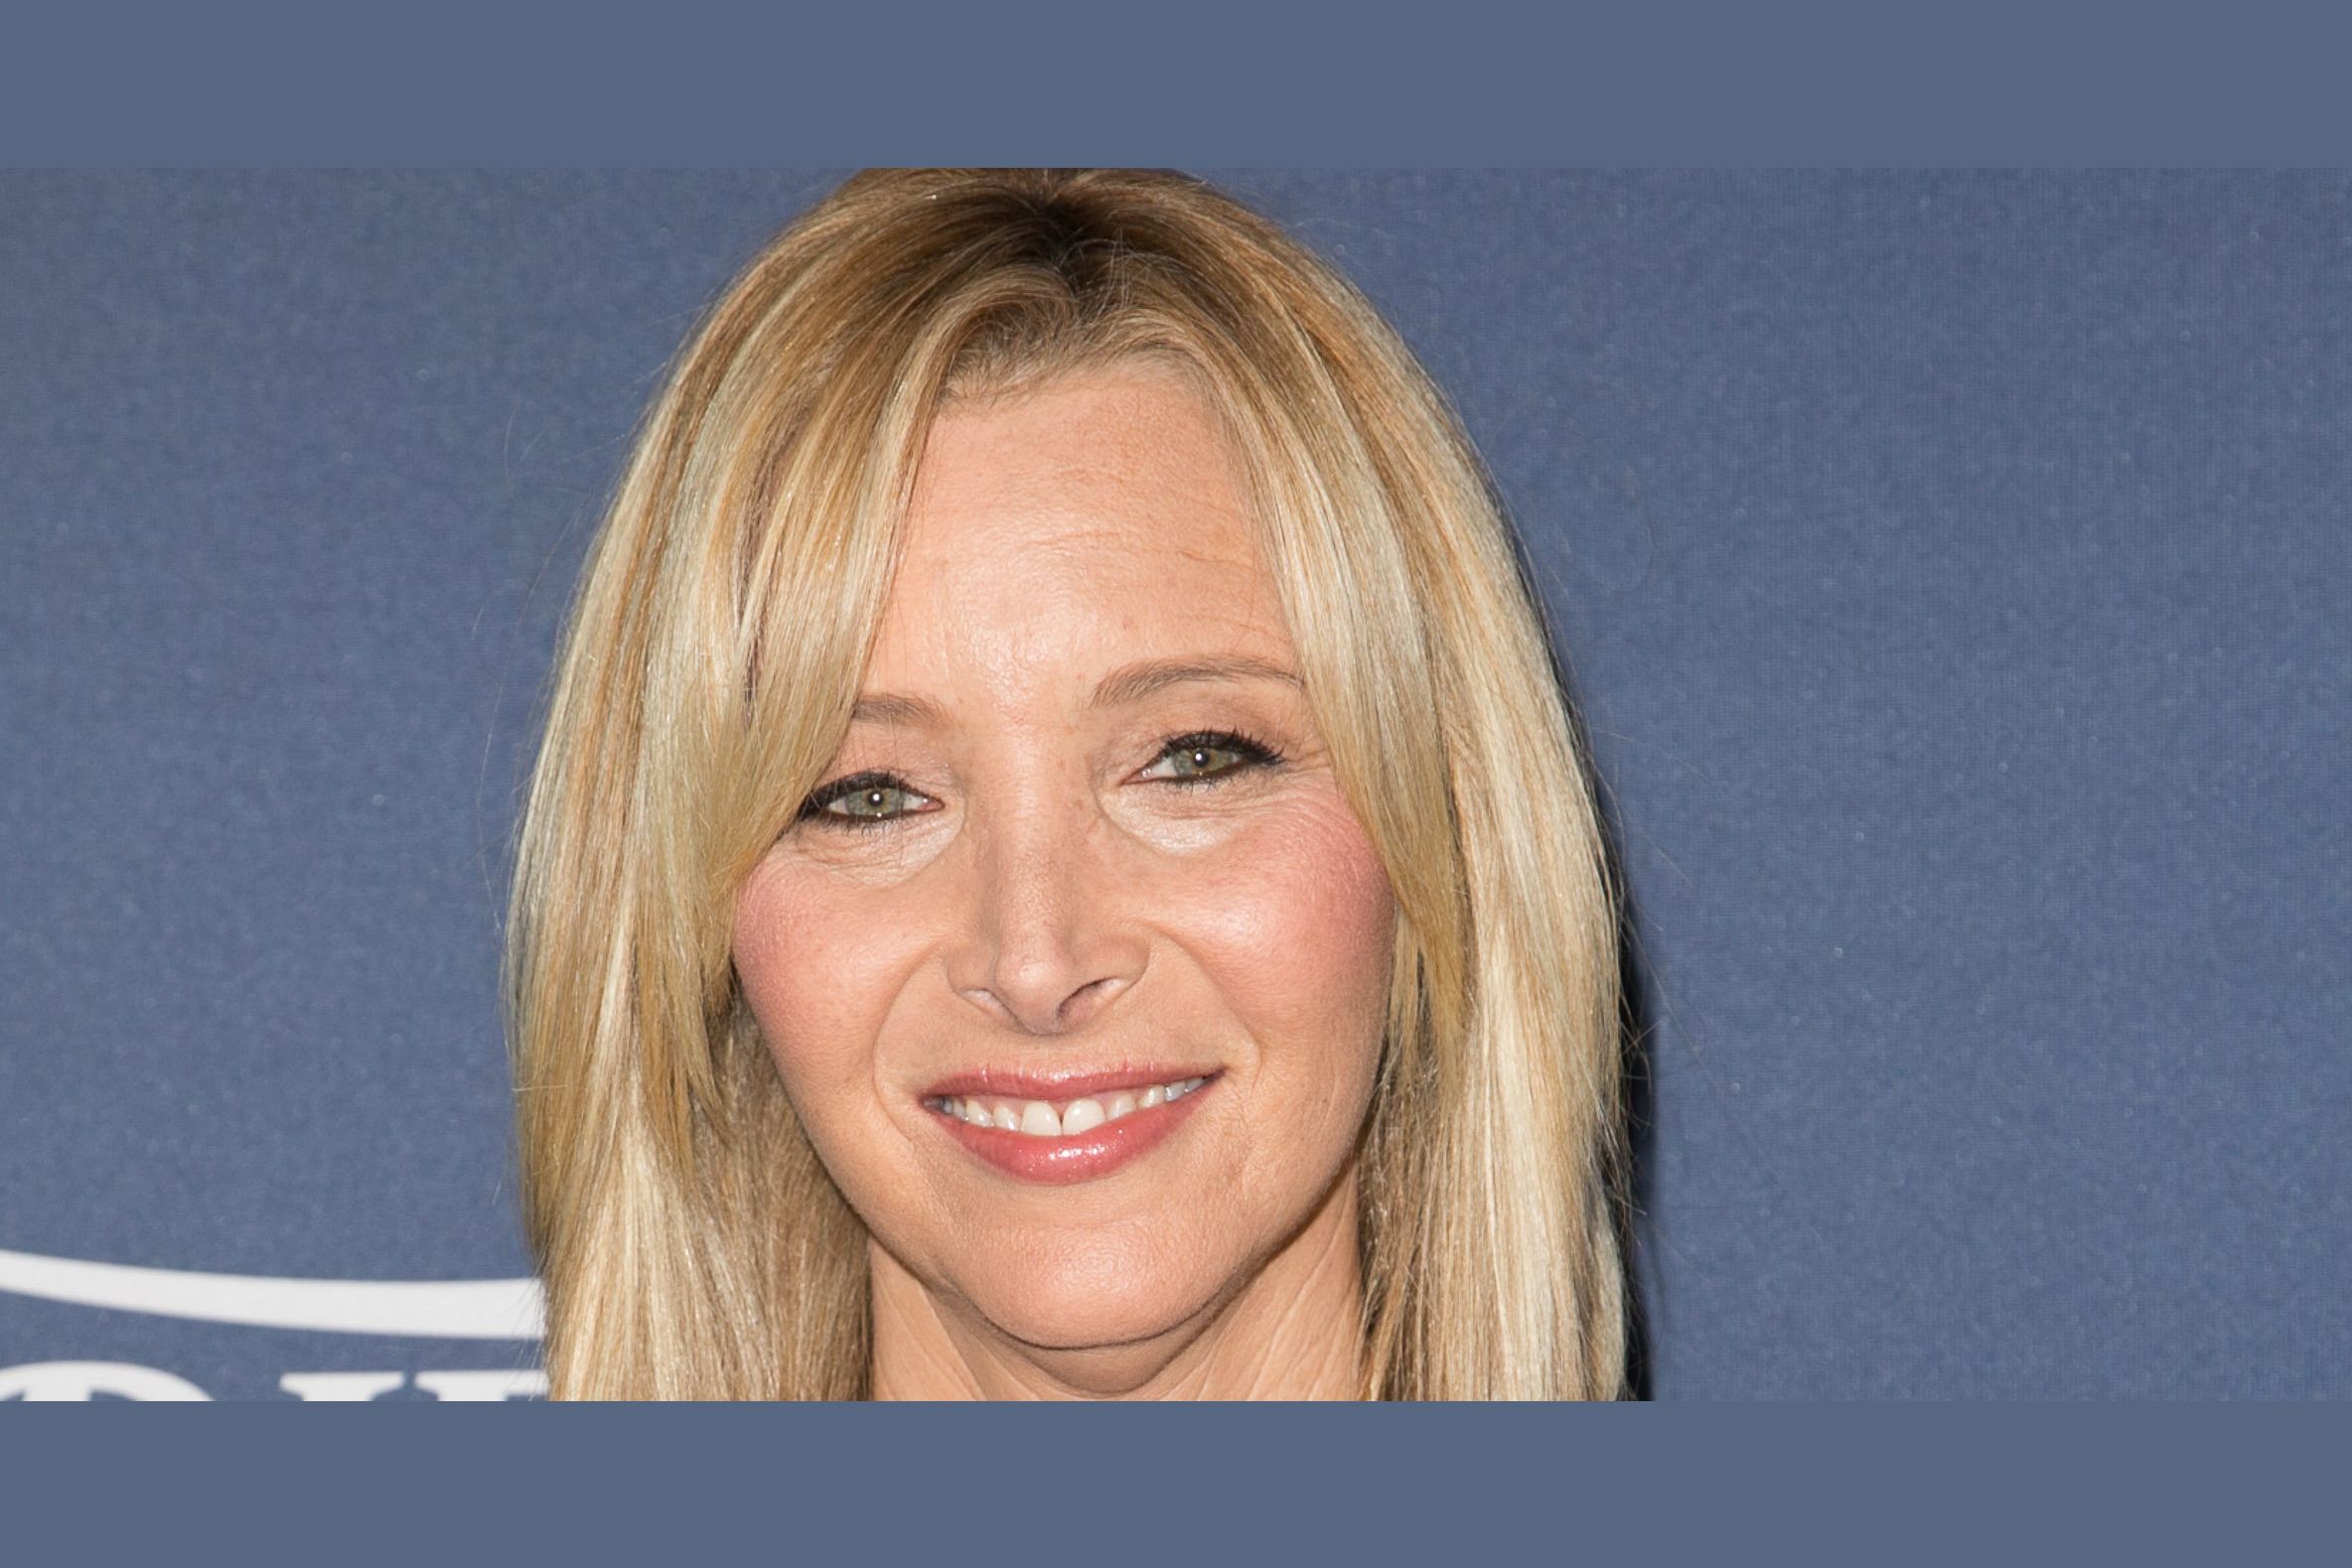 Rank Which Friends Guest Star You Think Told Lisa Kudrow She Was Fuckable